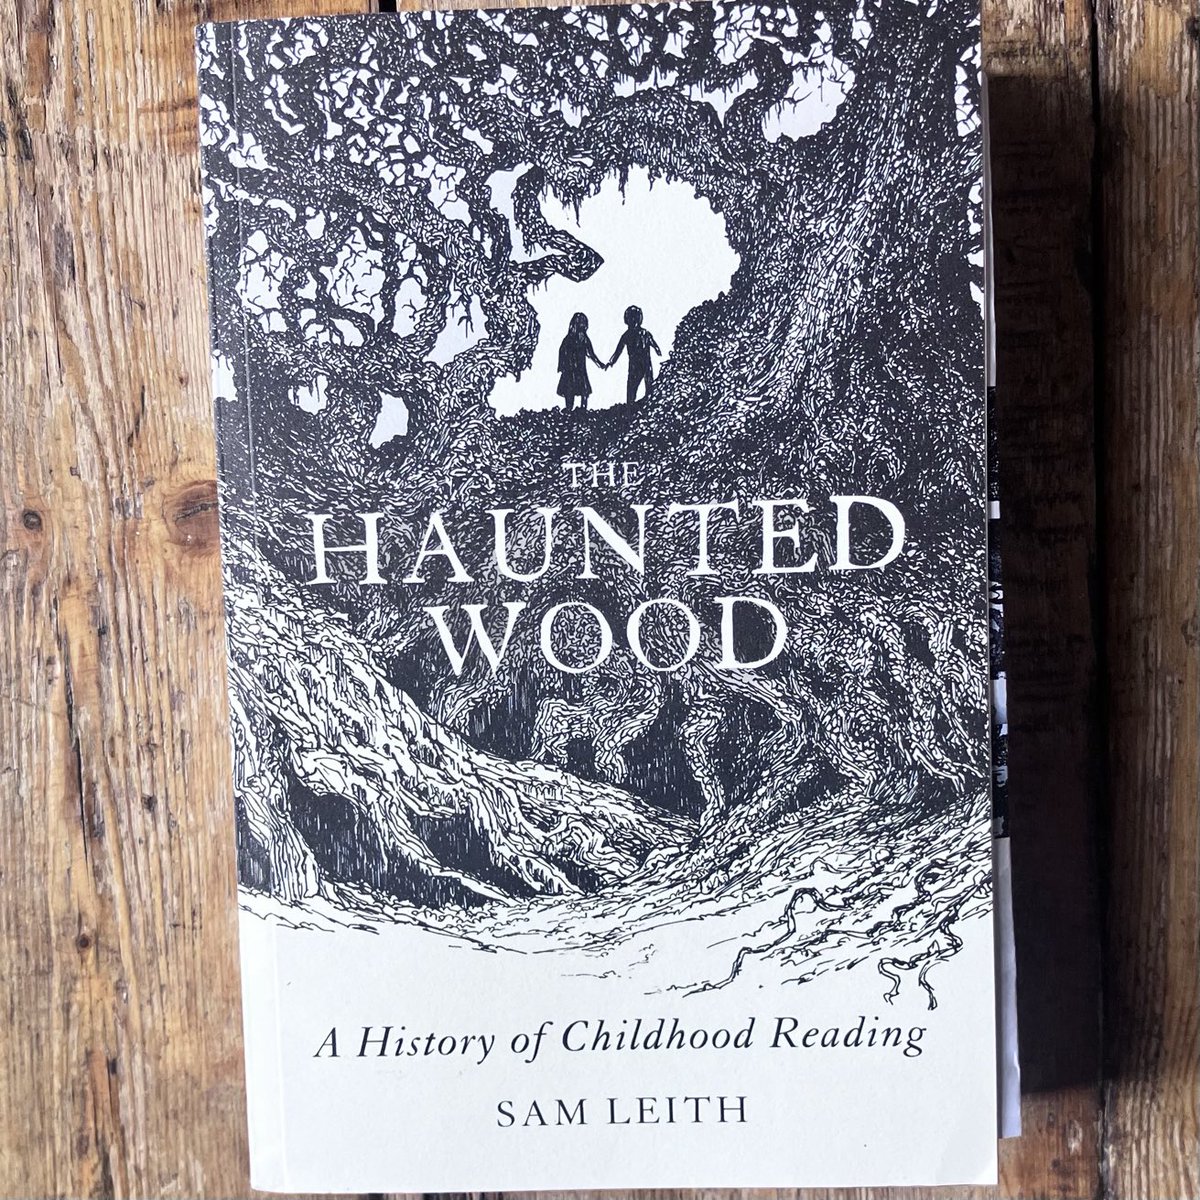 Thanks ⁦@OneworldNews⁩ - the forthcoming compendium/analysis of children’s literature from ⁦@questingvole⁩ looks fascinating. Aren’t we all somehow, somewhere, still in that haunted wood? Out 5 Sept